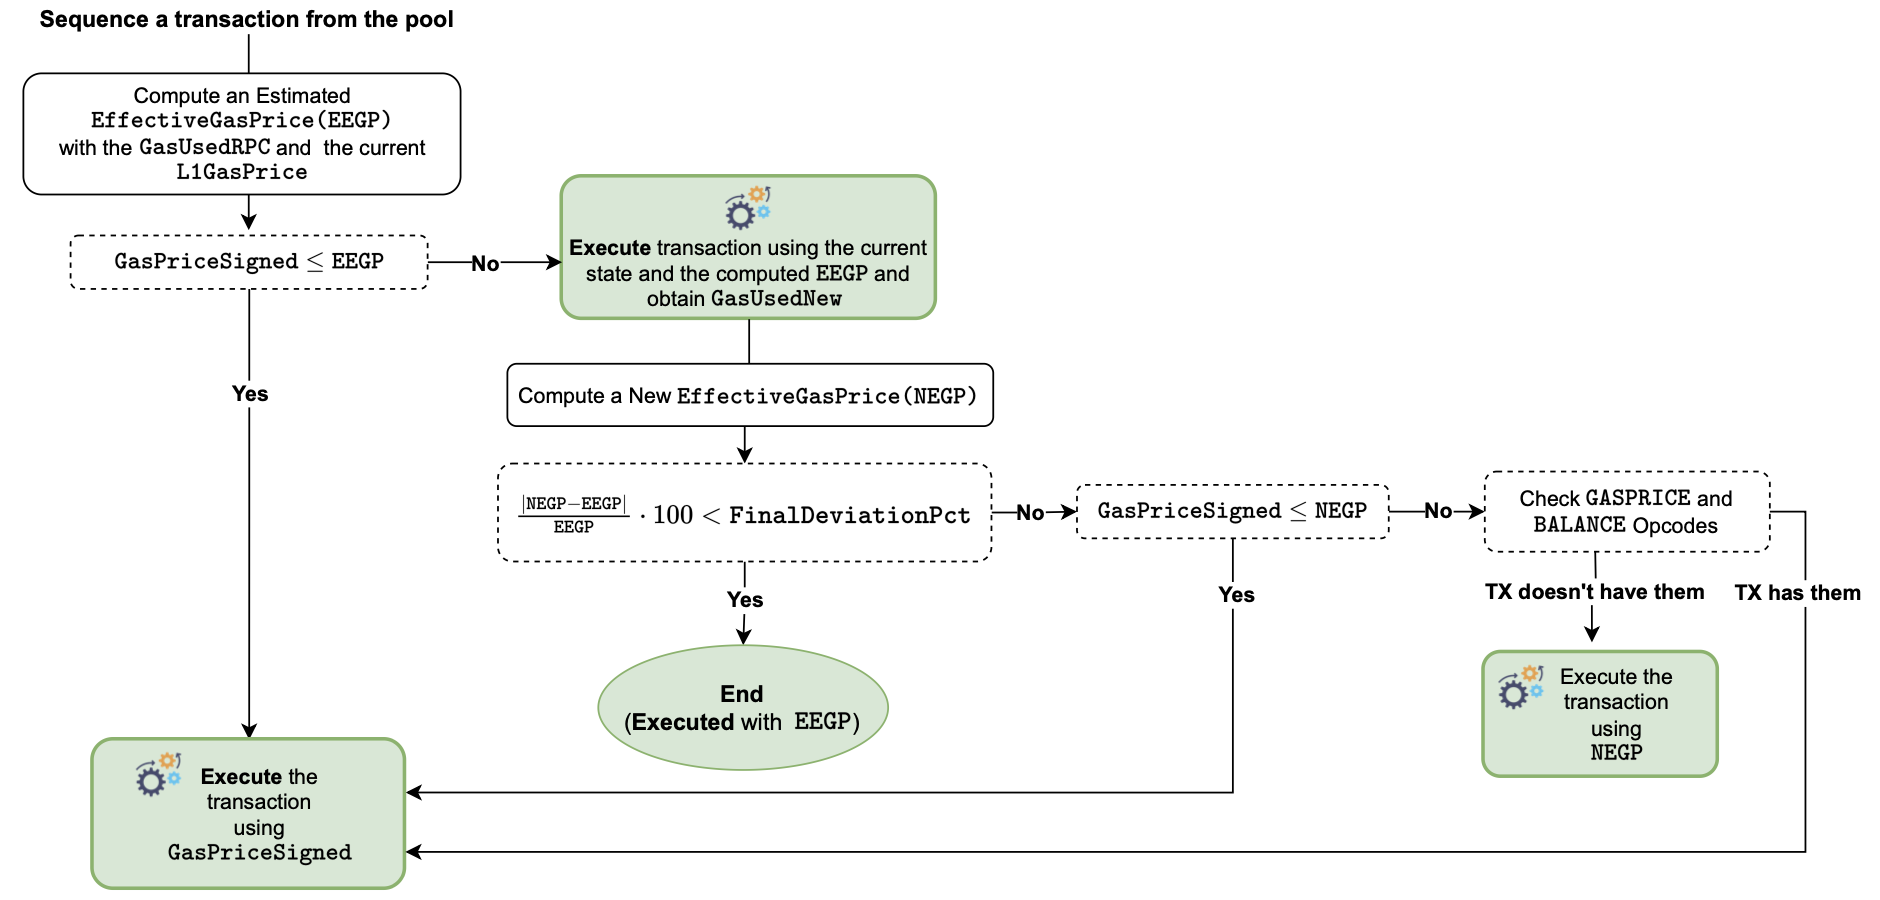 Figure: Transaction flow in the Sequencer